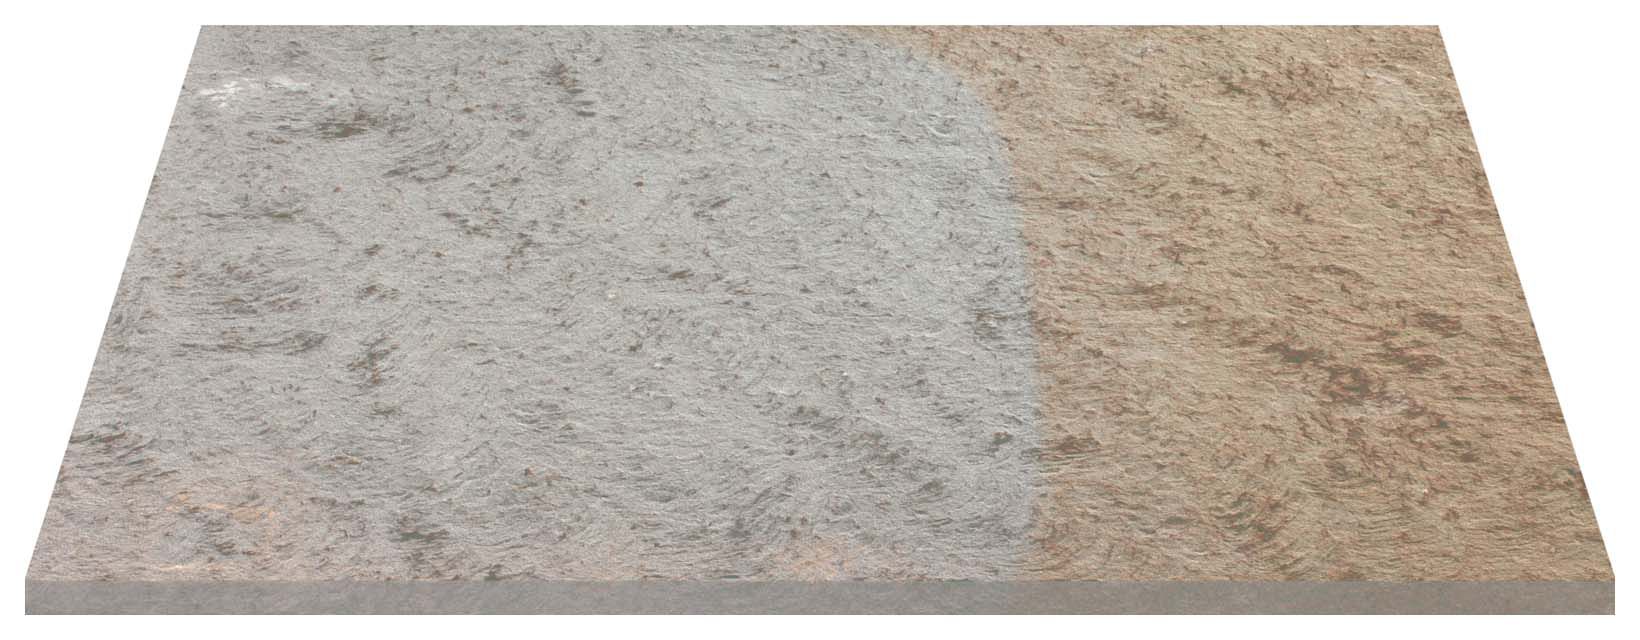 Image of Marshalls Scoutmoor Textured Rustic Paving Slab Mixed Size - Sample